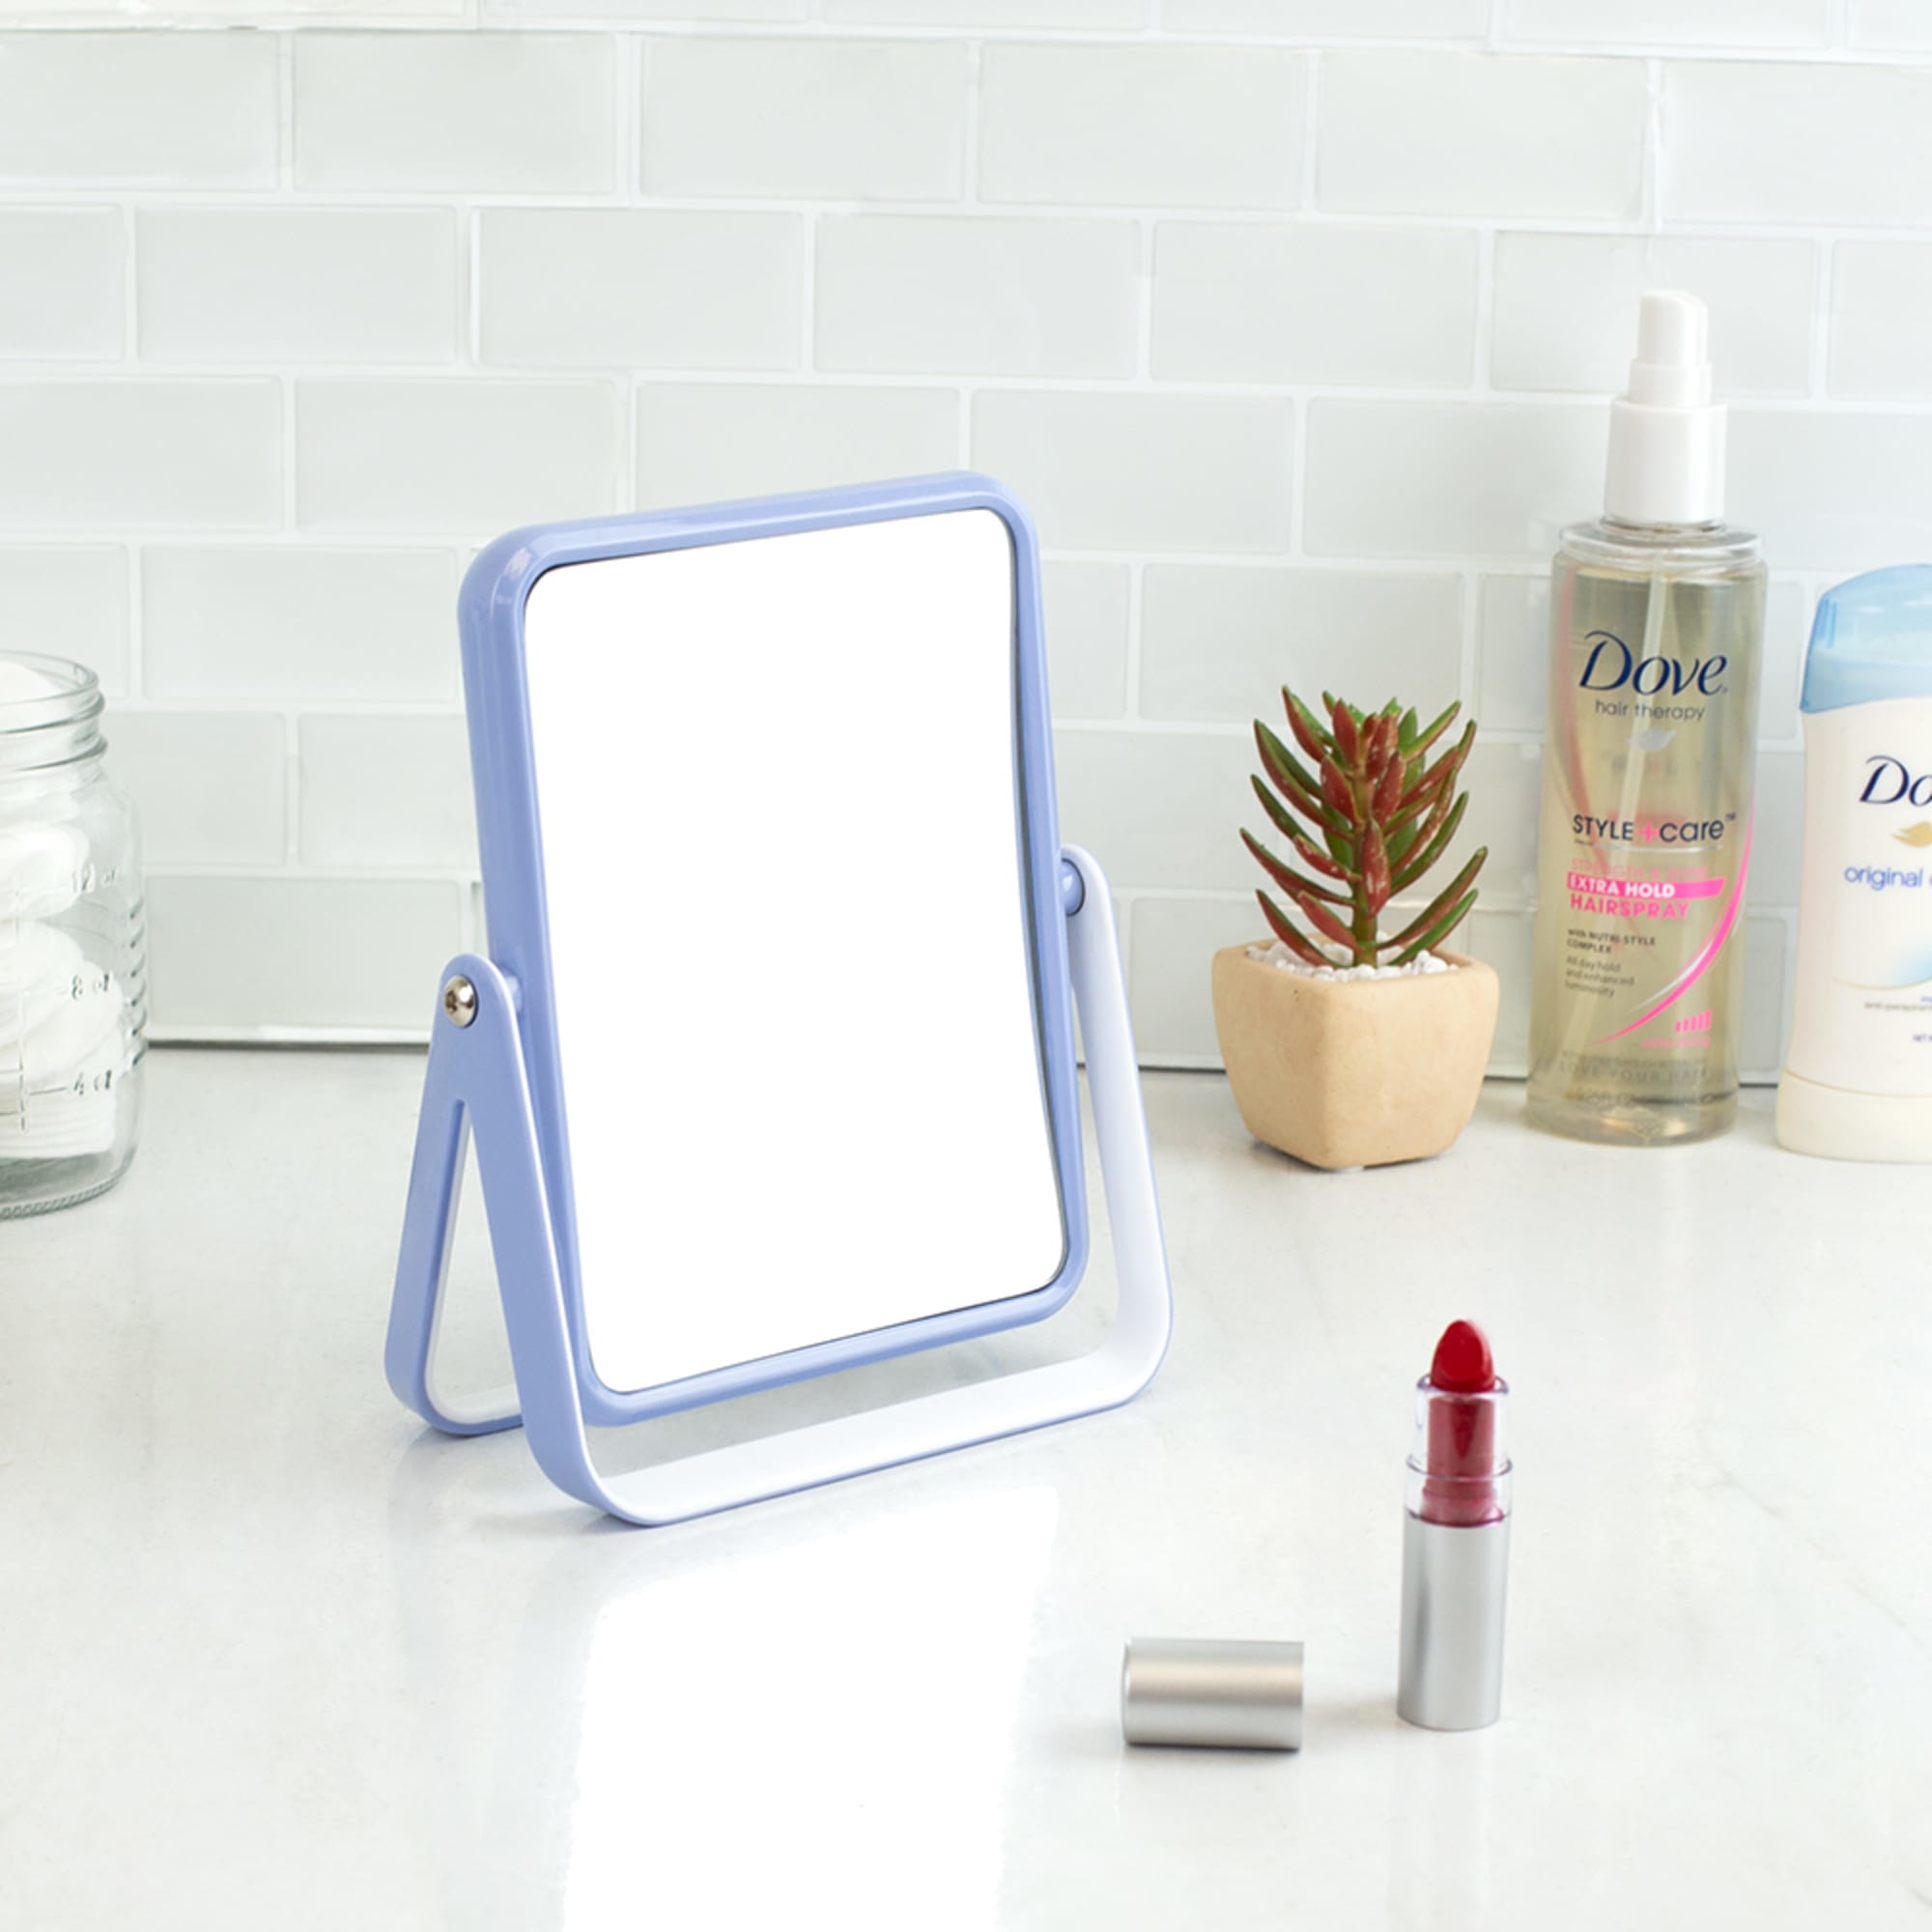 Home Basics Rectangle Cosmetic Mirror $6.50 EACH, CASE PACK OF 12